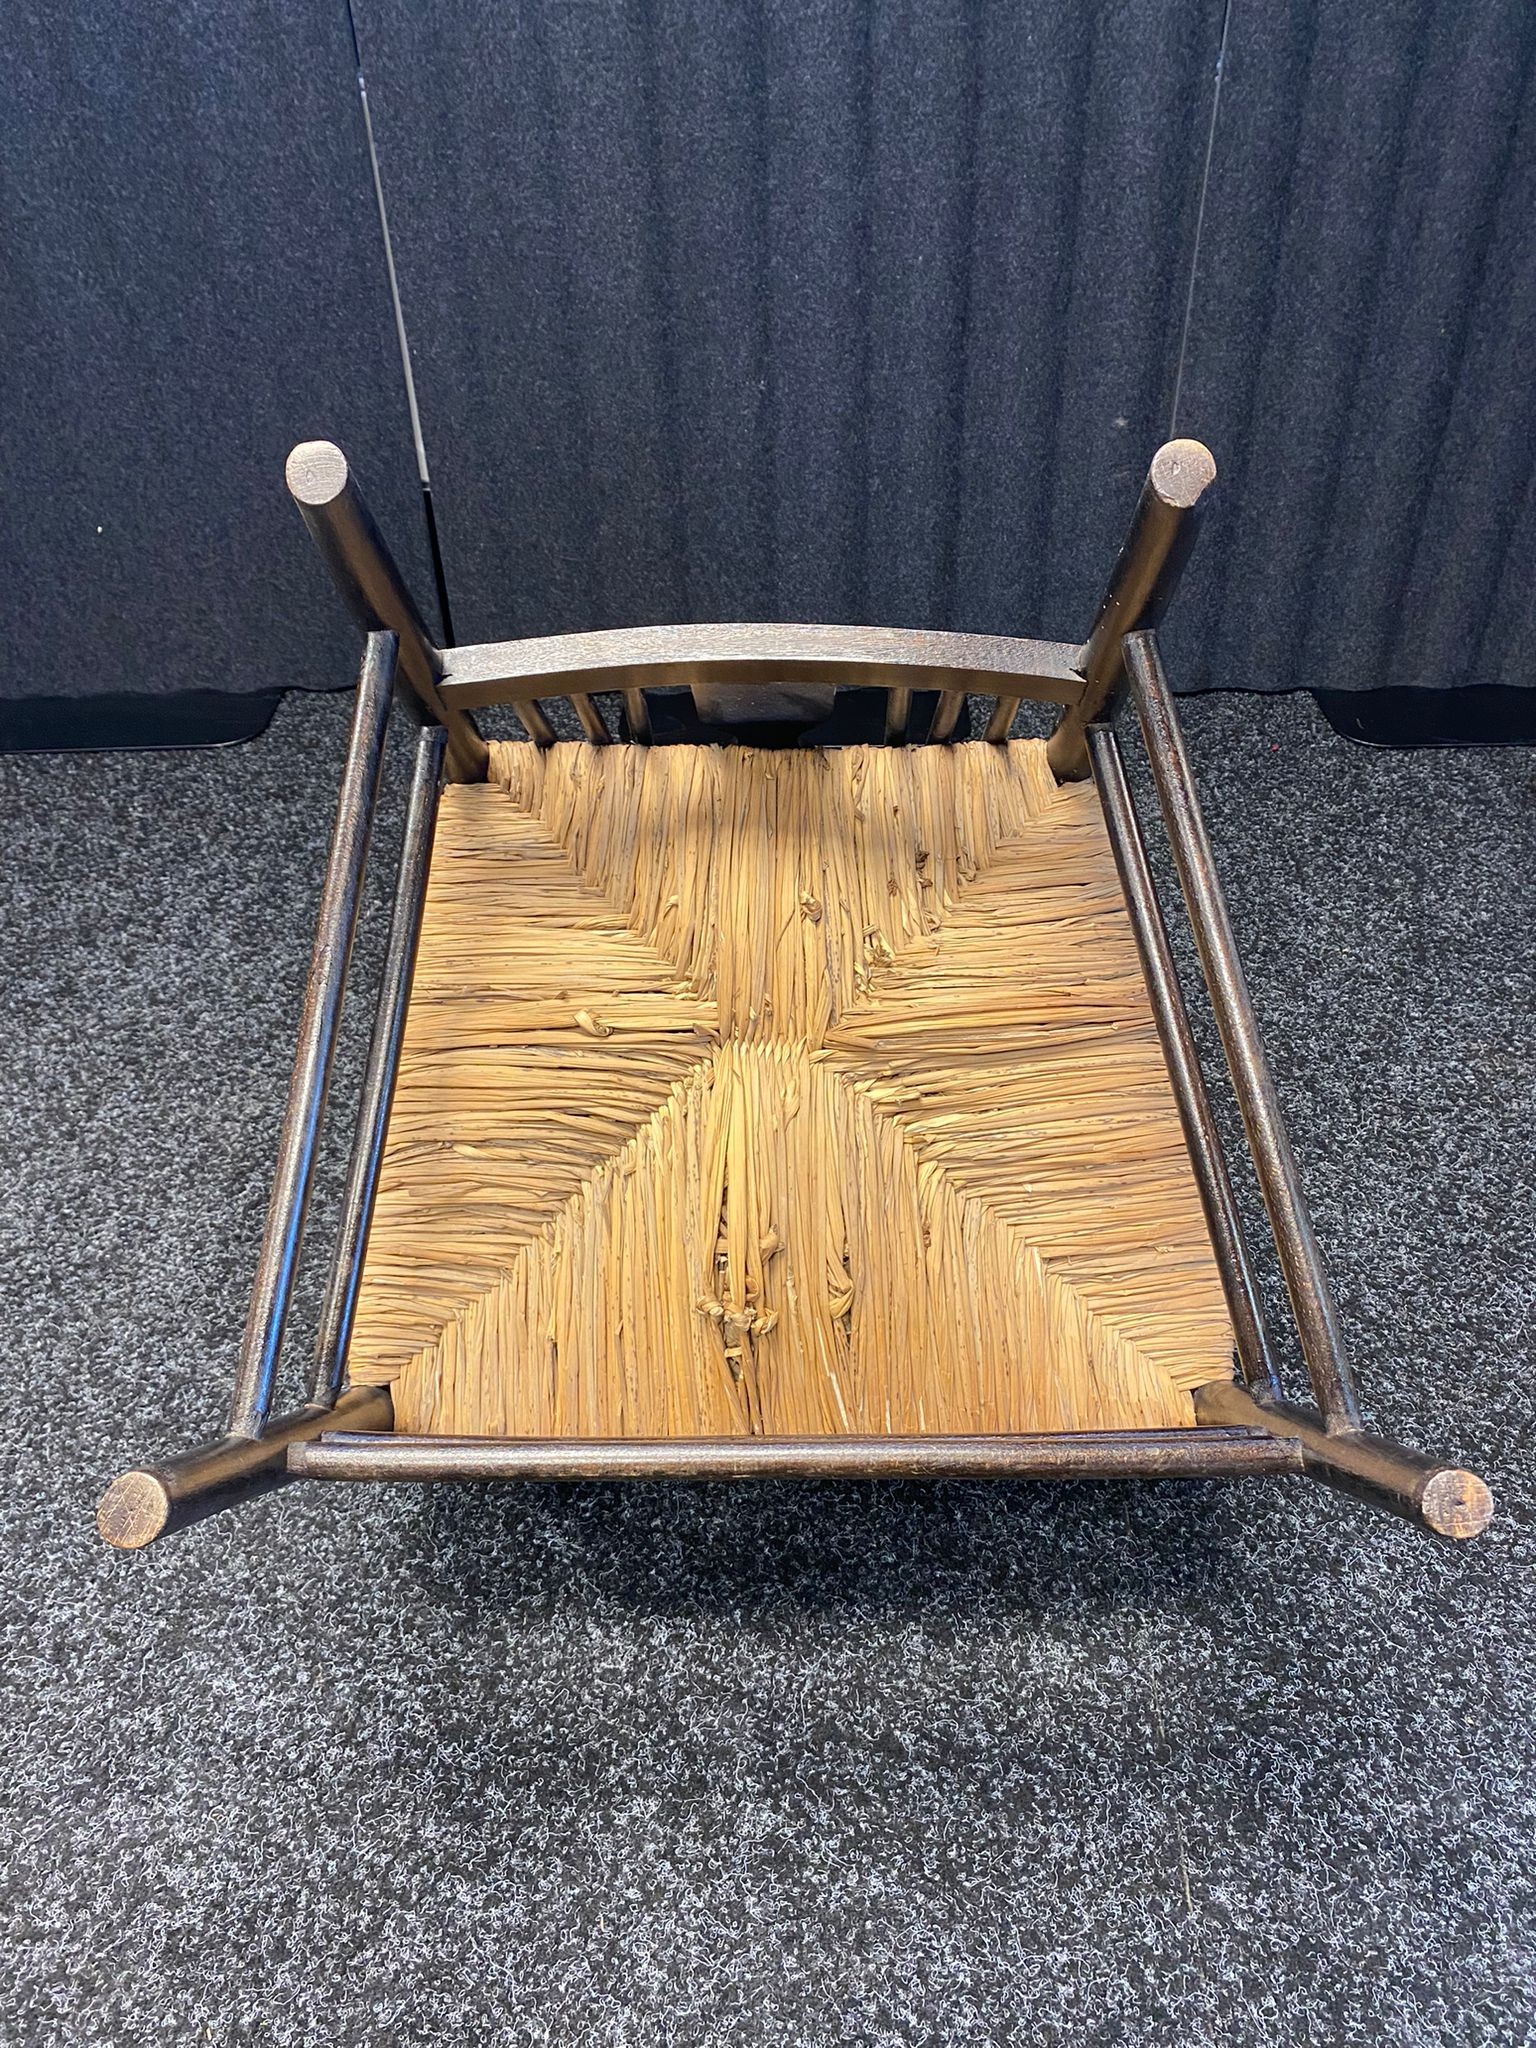 Arts & Crafts chair, weaved seat, turned legs [87cm] - Image 4 of 5